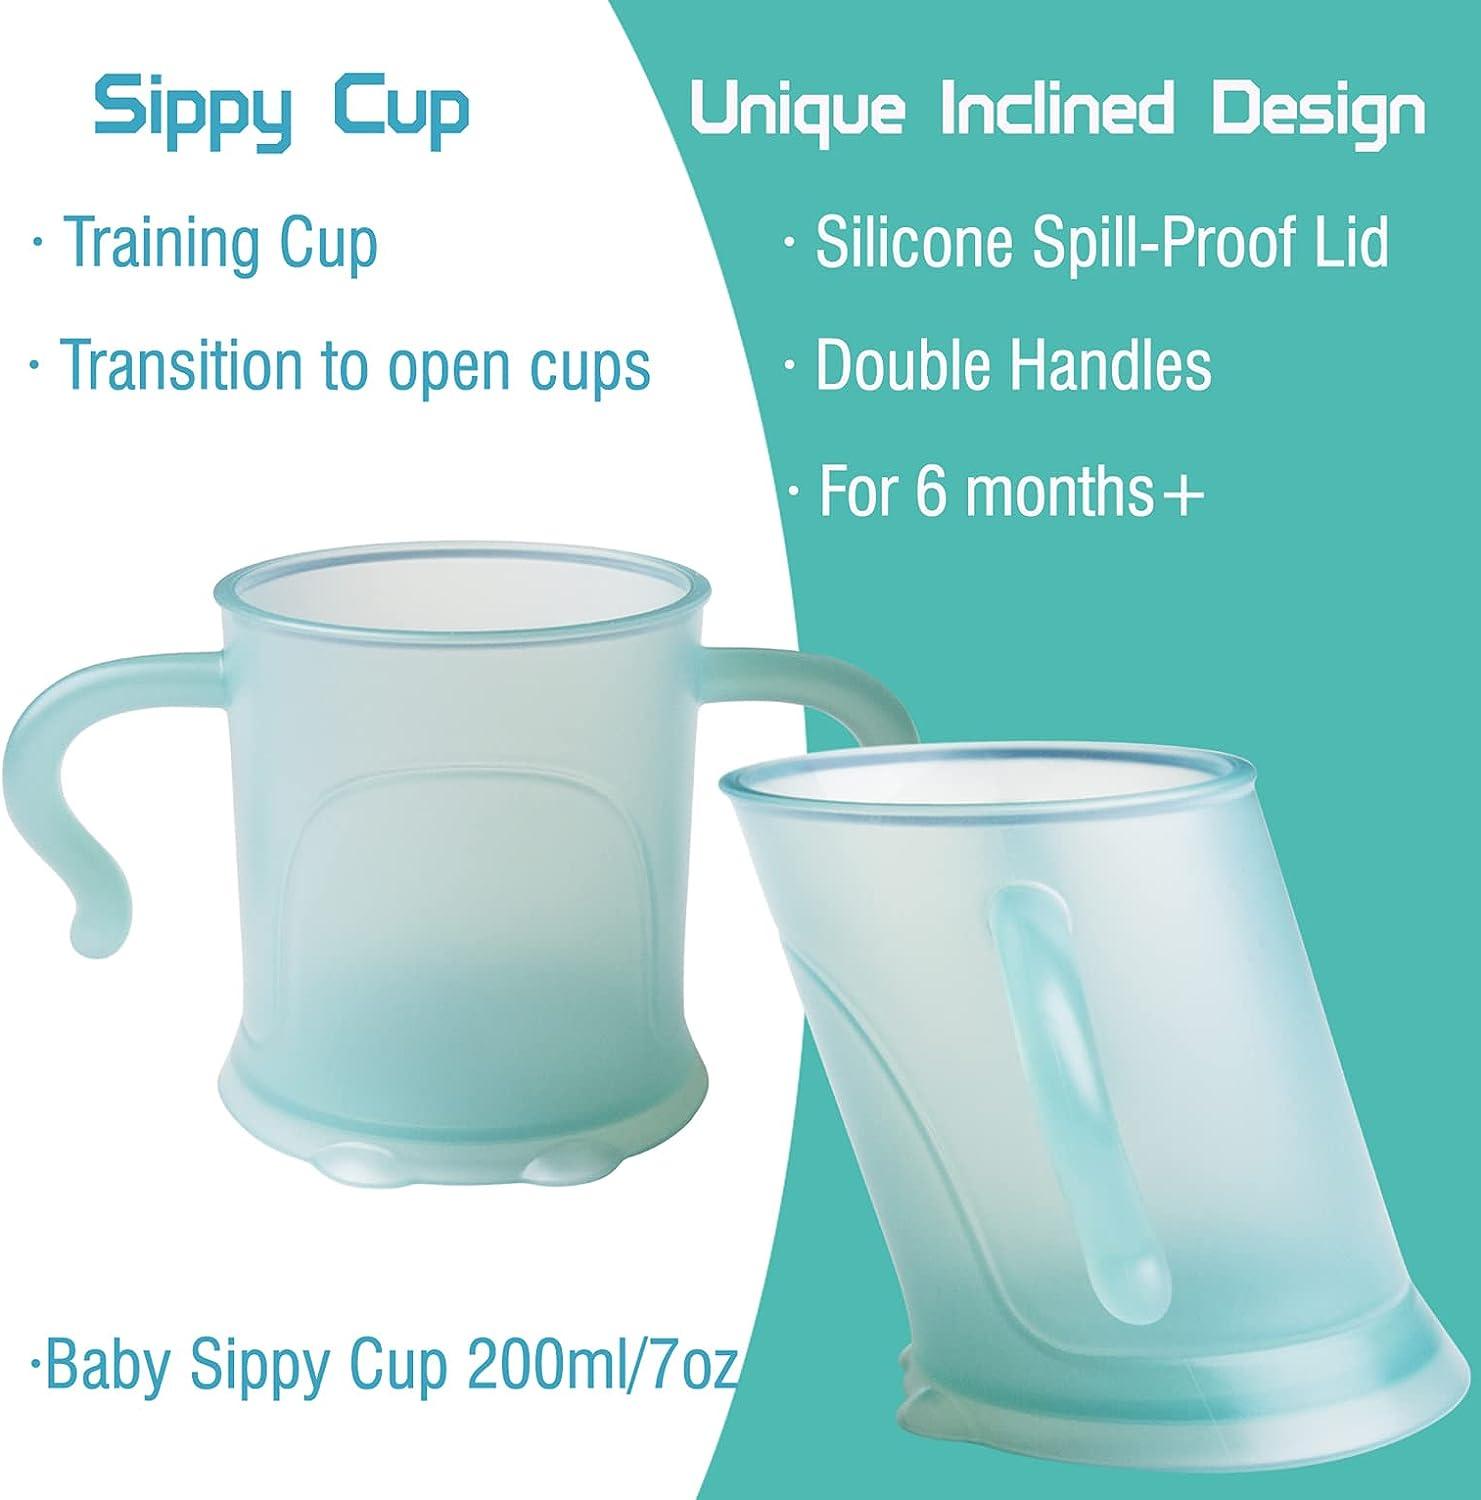 Baybee Silicone Sippy Cup With Handles Spout Lid Toddler